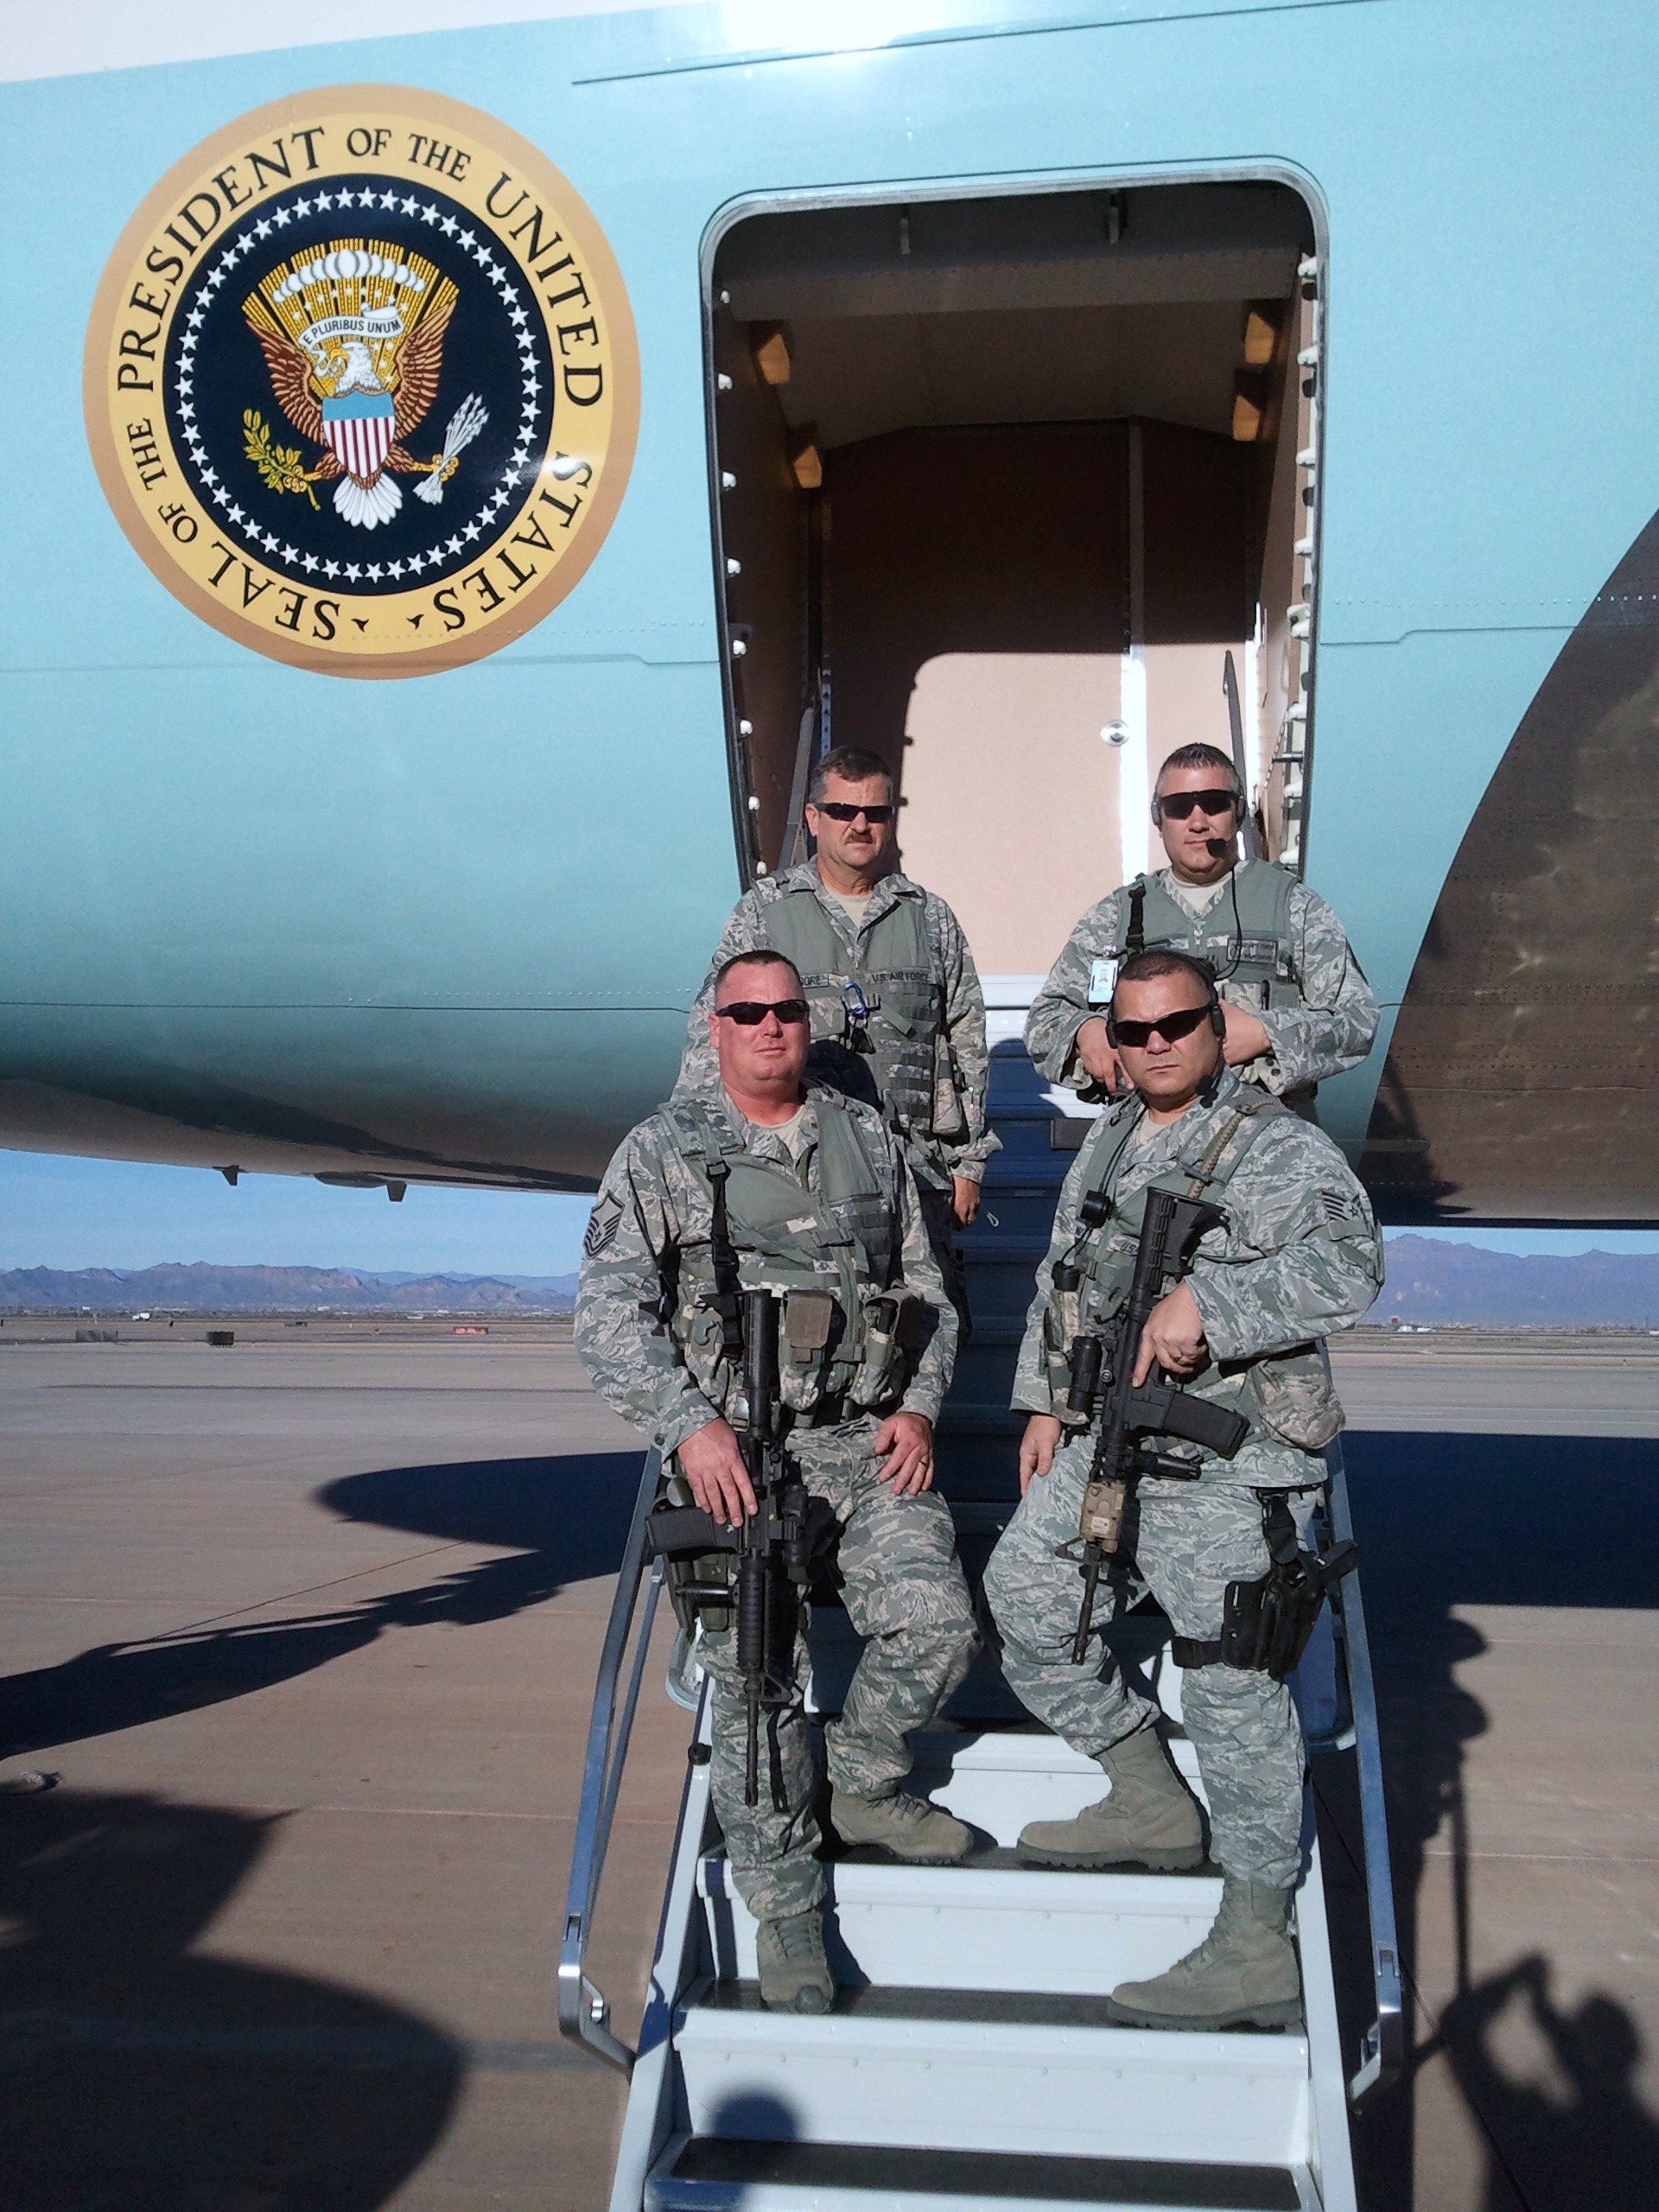 161st Sfs Provides Security To Air Force One